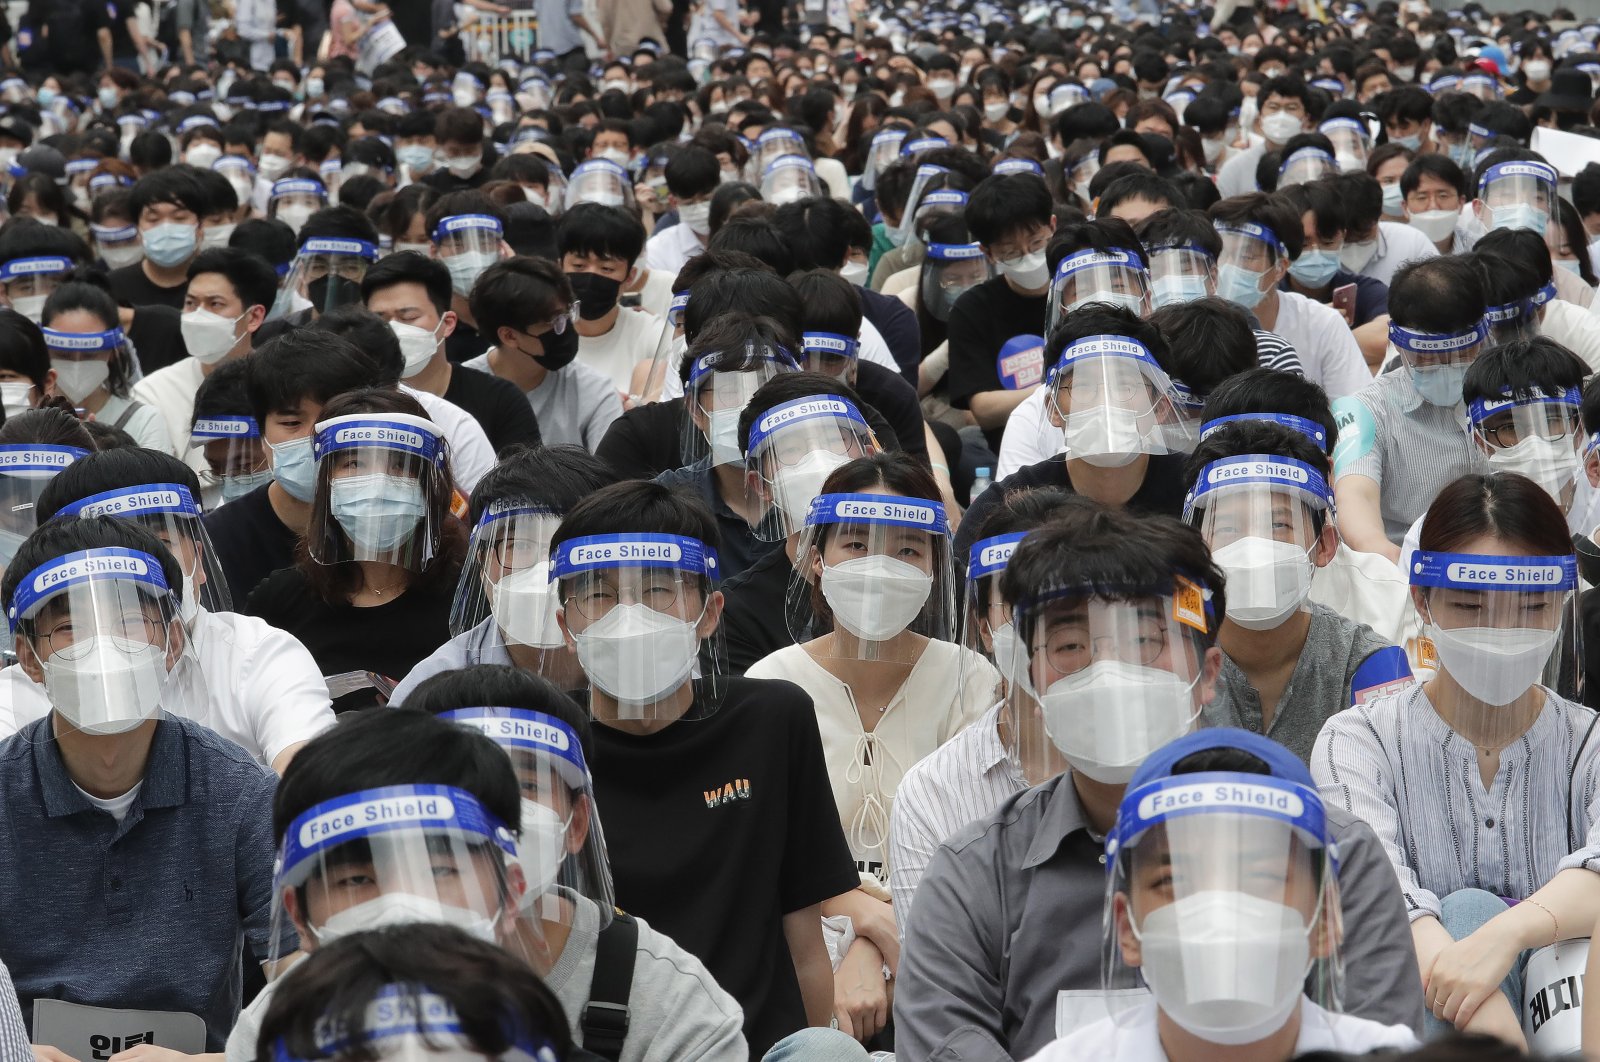 Interns and resident doctors stage a rally against the government medical policy in Seoul, South Korea, Aug. 7, 2020. (AP Photo)